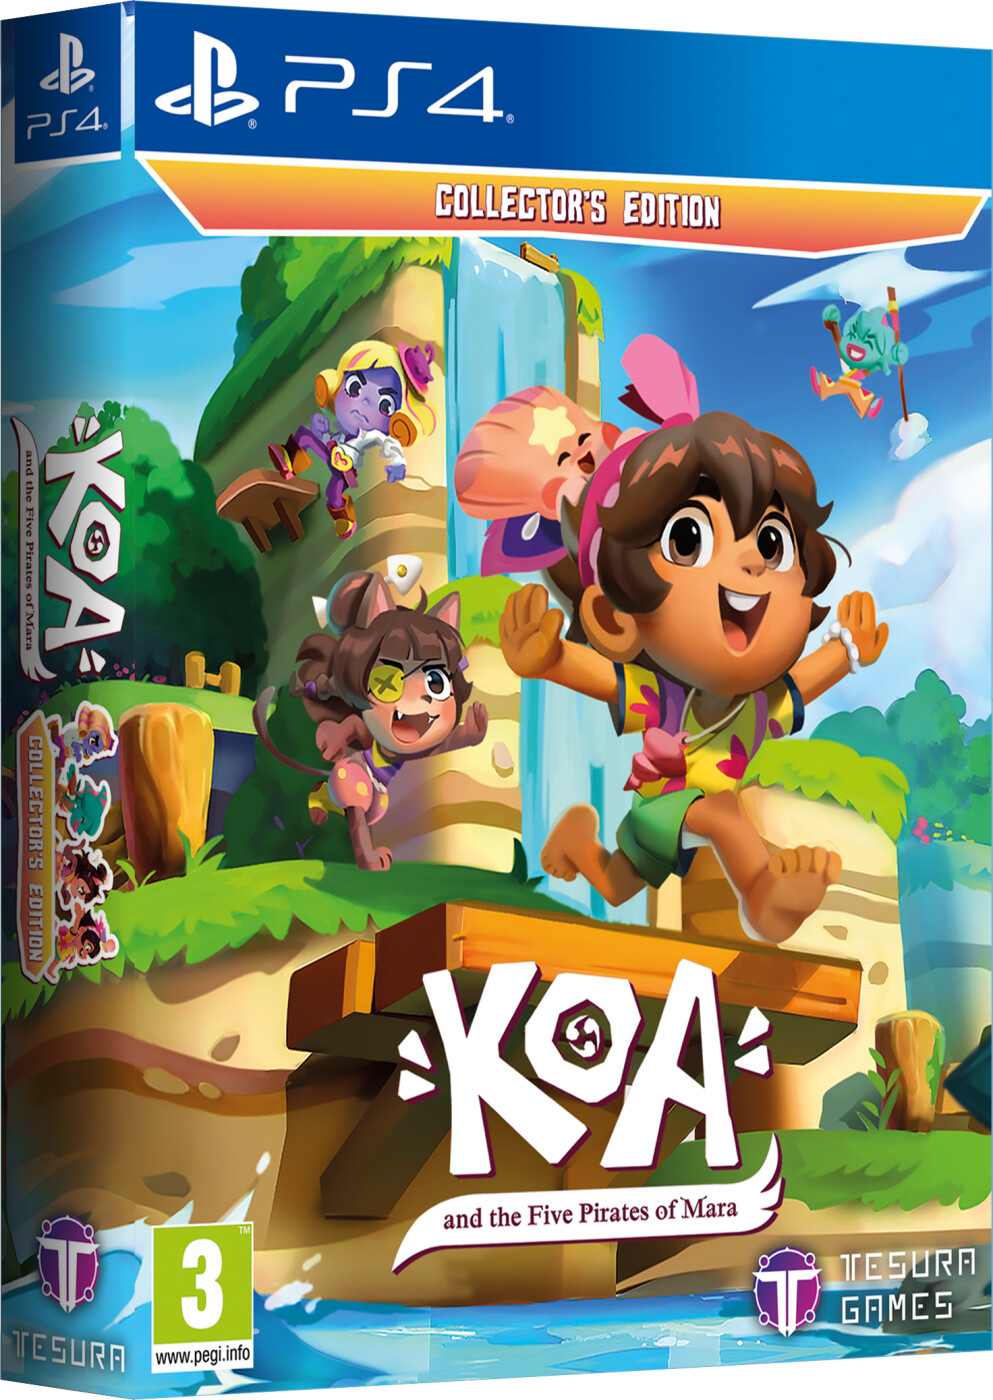 Koa And The Five Pirates Of Mara (collector's Edition) - PS4